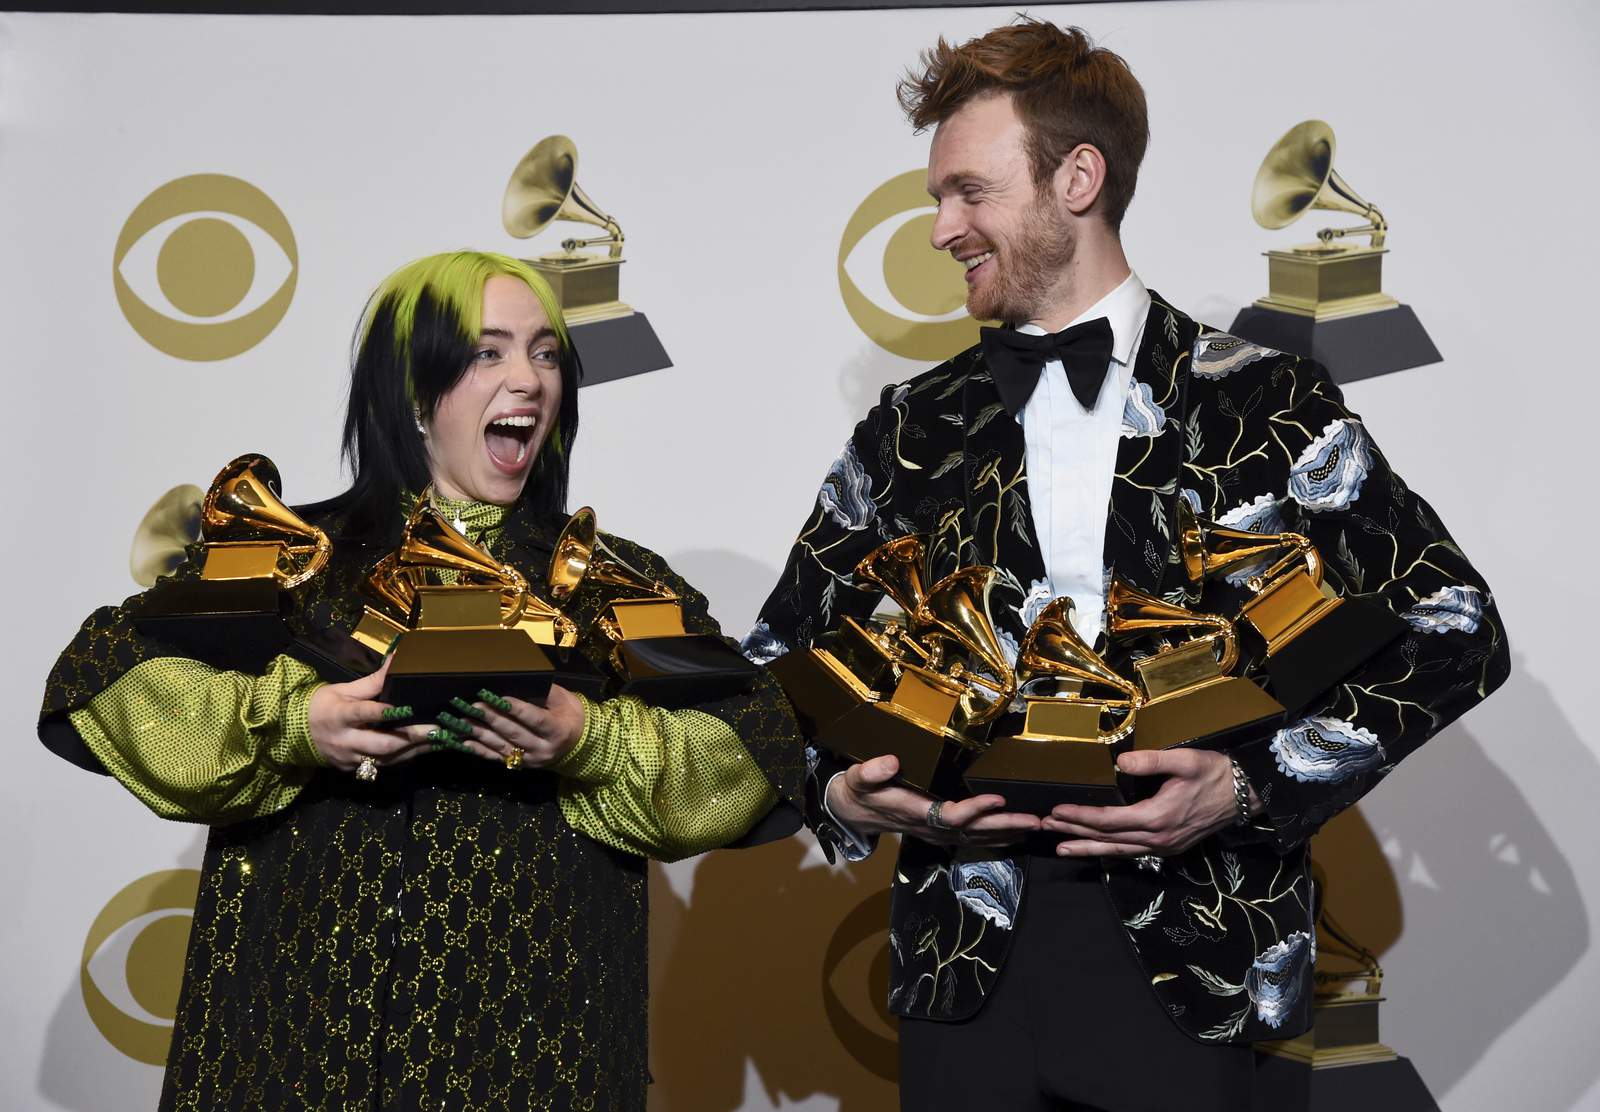 Billie Eilish A Voice Of The Youth Tops The Grammy Awards